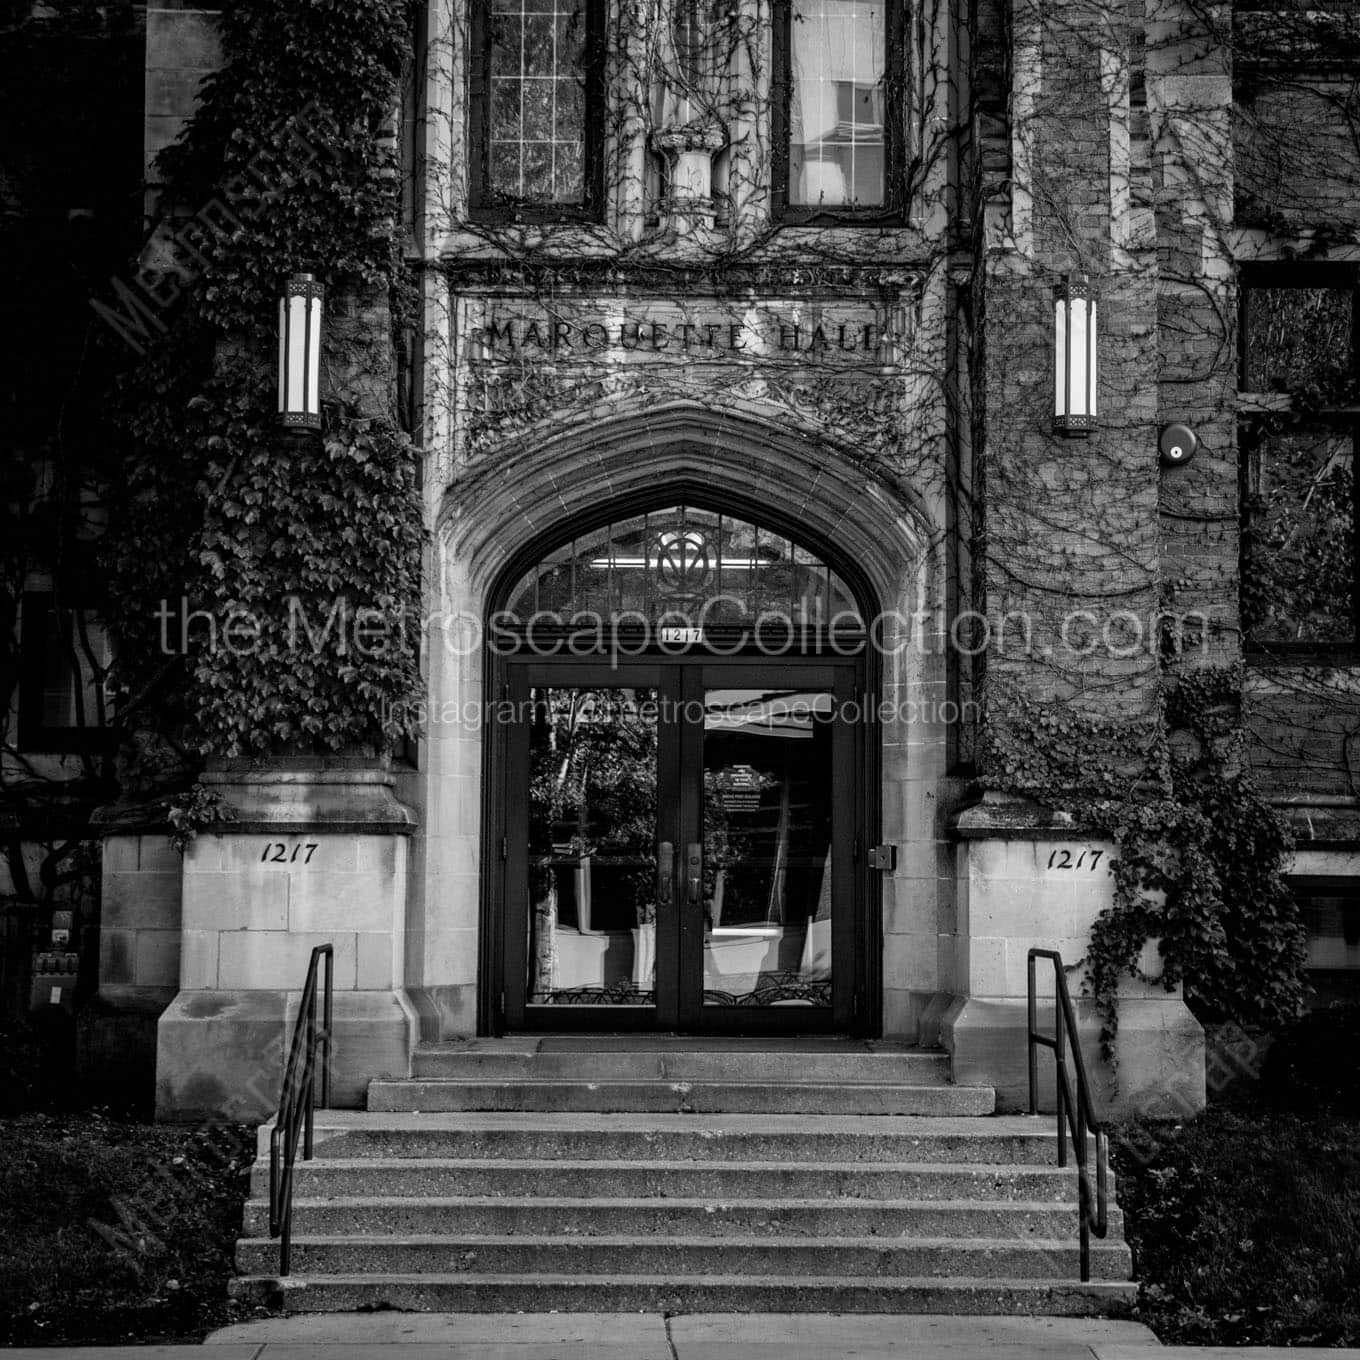 marquette hall 1217 wisconsin ave Black & White Office Art